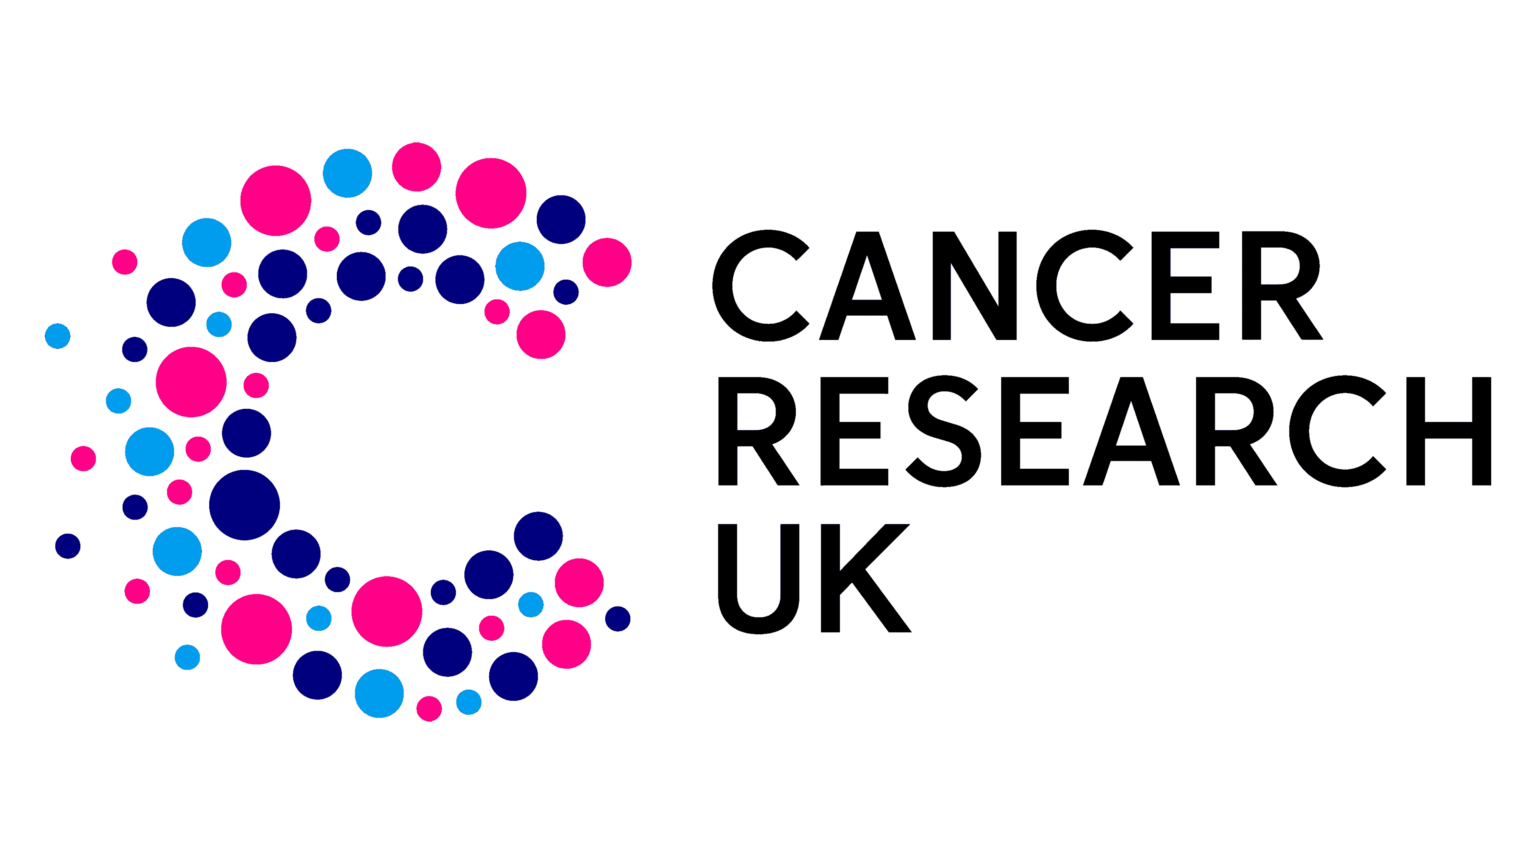 cancer research uk glasgow reviews